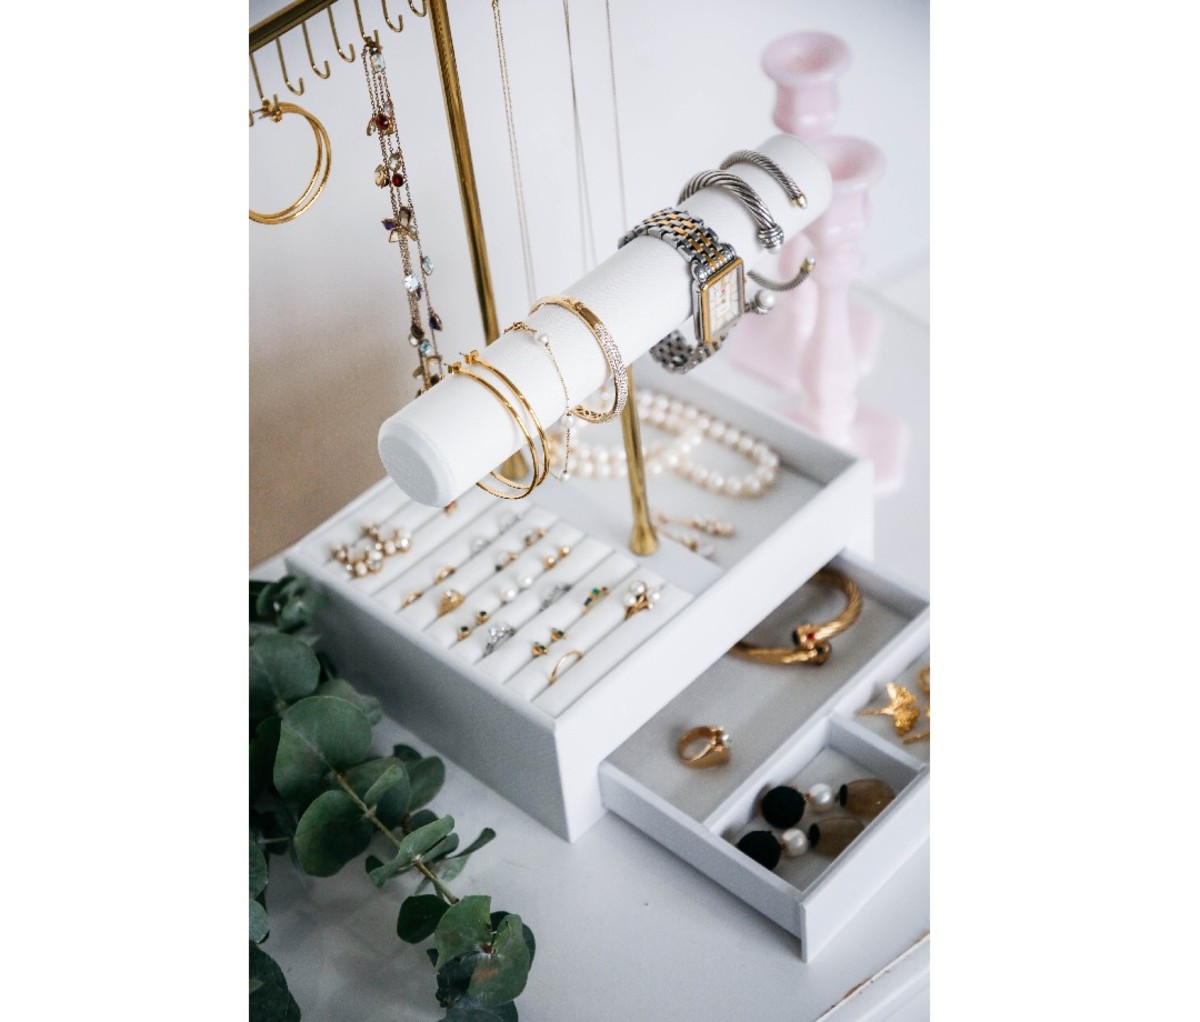 Gray Bow + Sprig Jewelry Stand adorned with hanging necklaces and other jewelry on a shelf and lower drawers